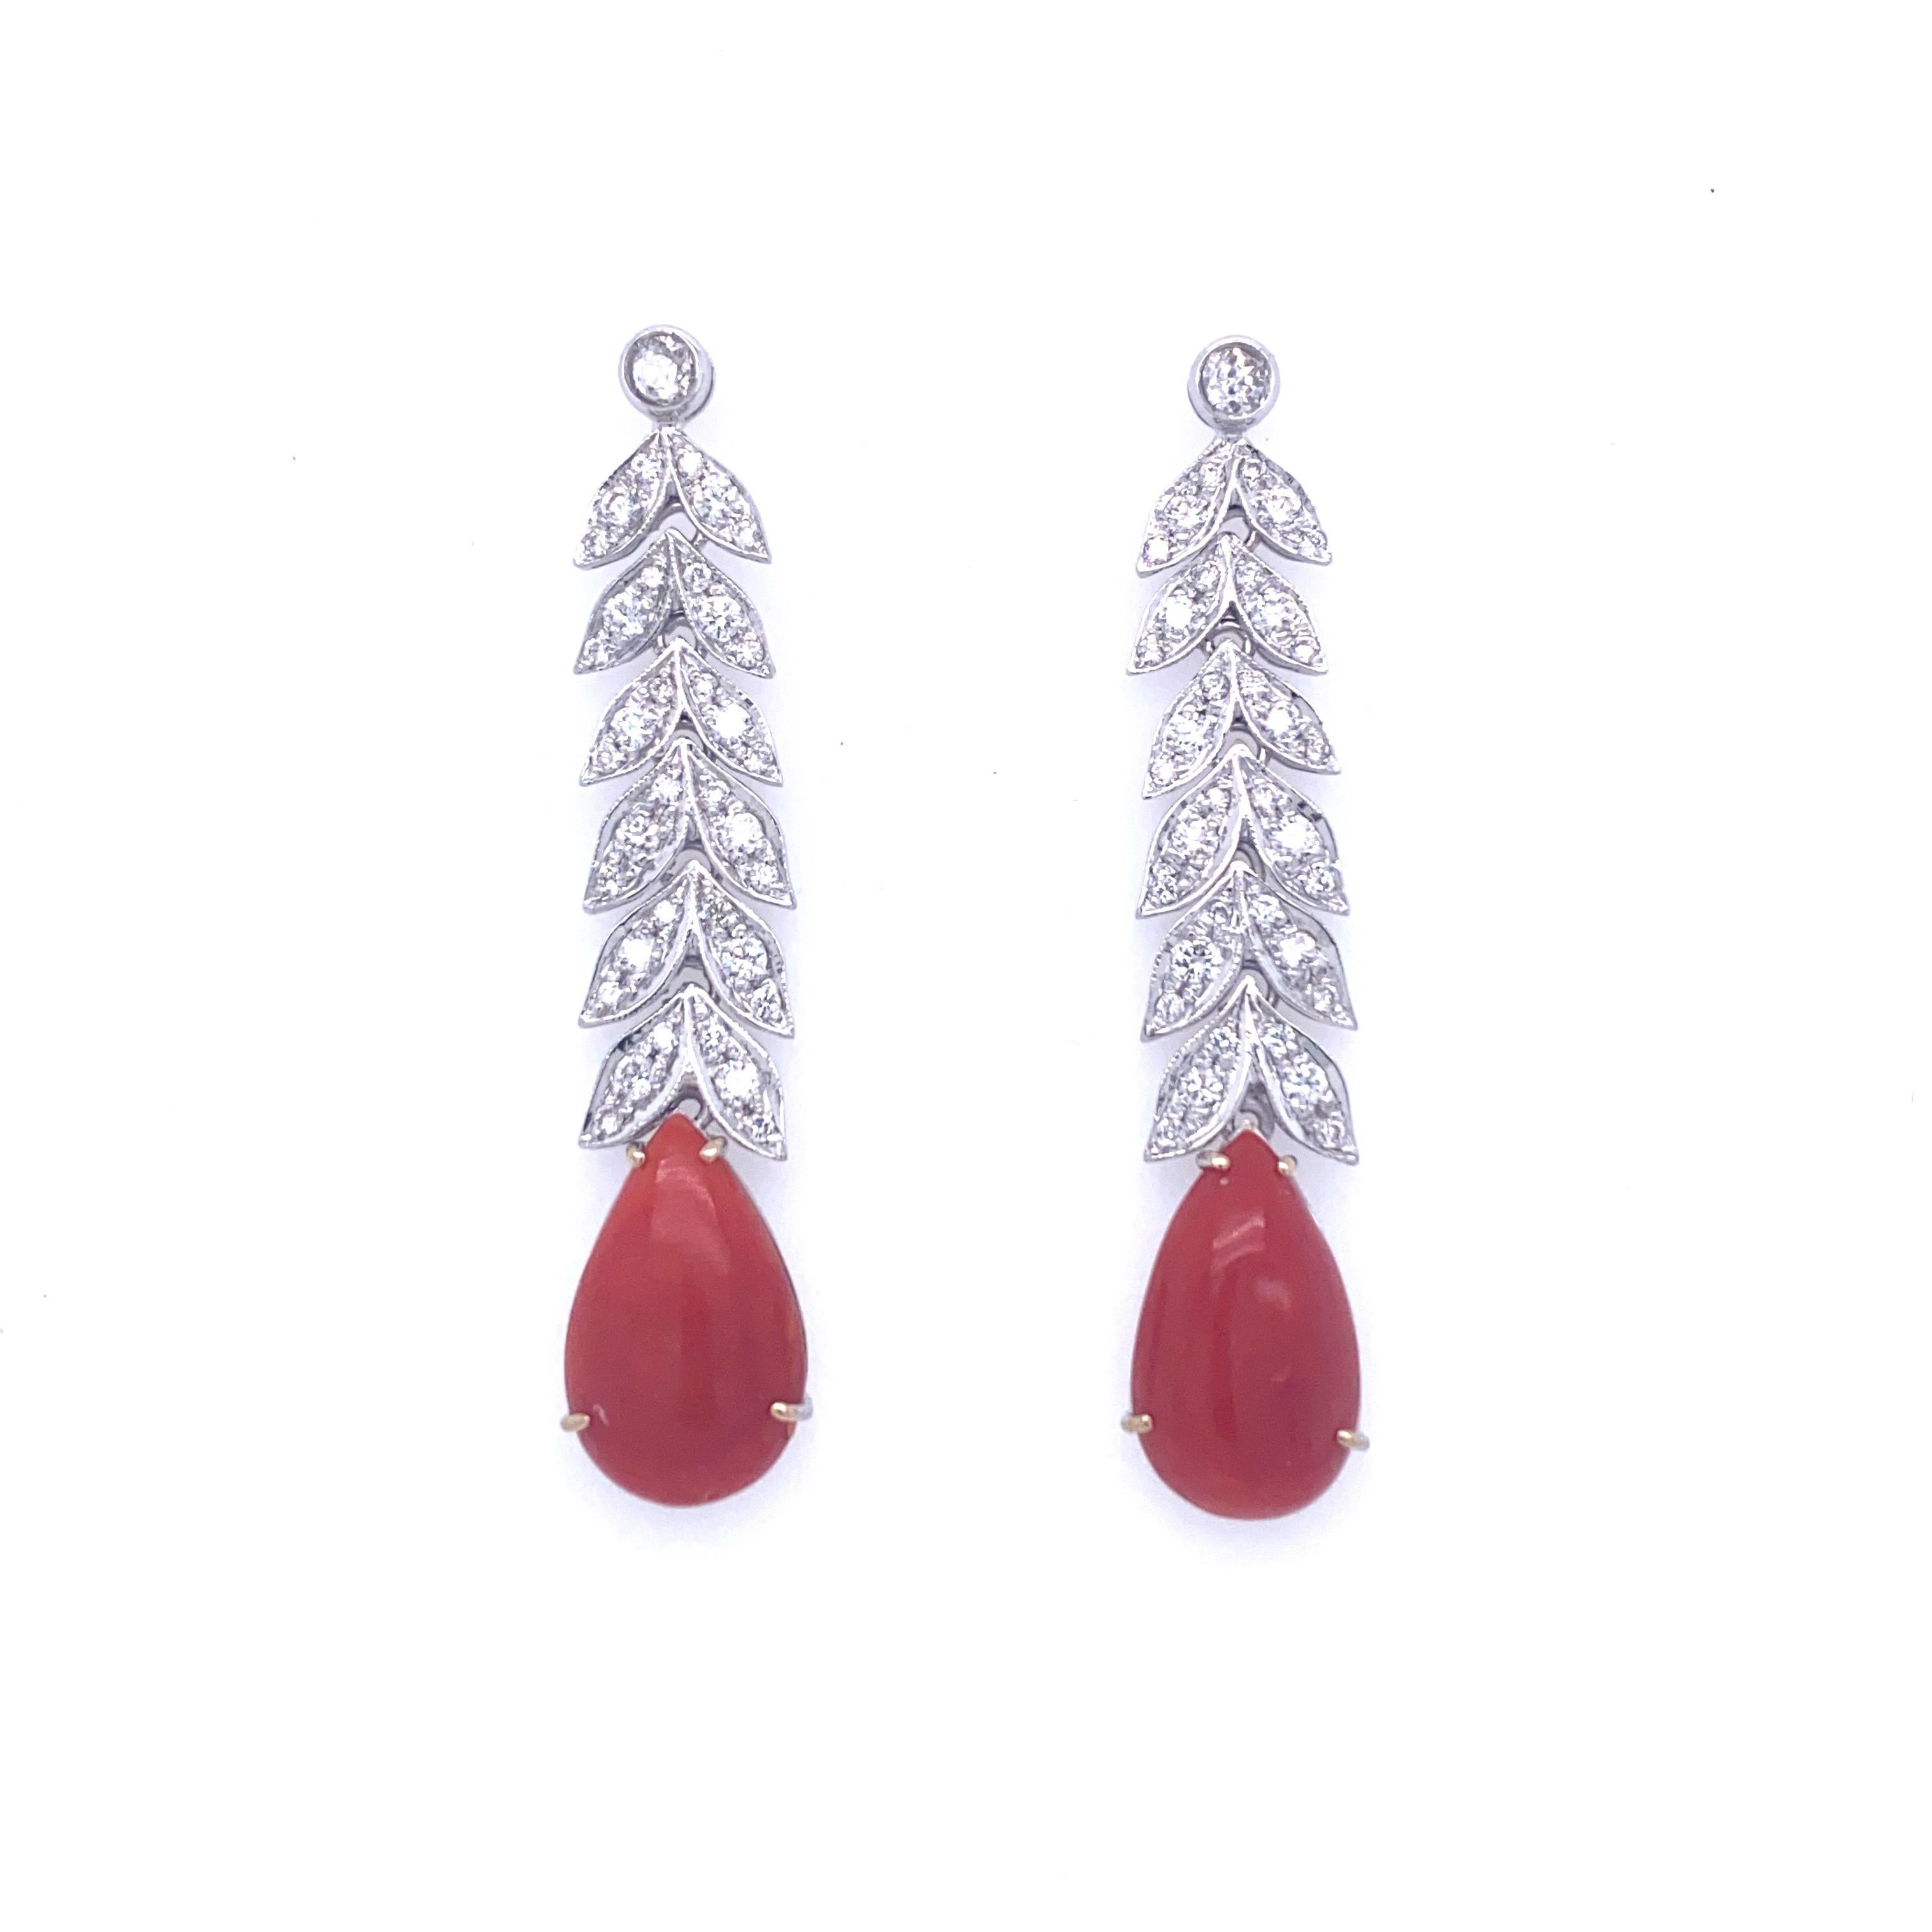 These Beautiful Art Deco 18k white gold earrings feature at the bottom 2 large drop natural Aka Coral, connected by leafs design links set with colorless round Diamonds graded G Color Vvs Clarity and weighing approximately 2.00 carat.
Circa